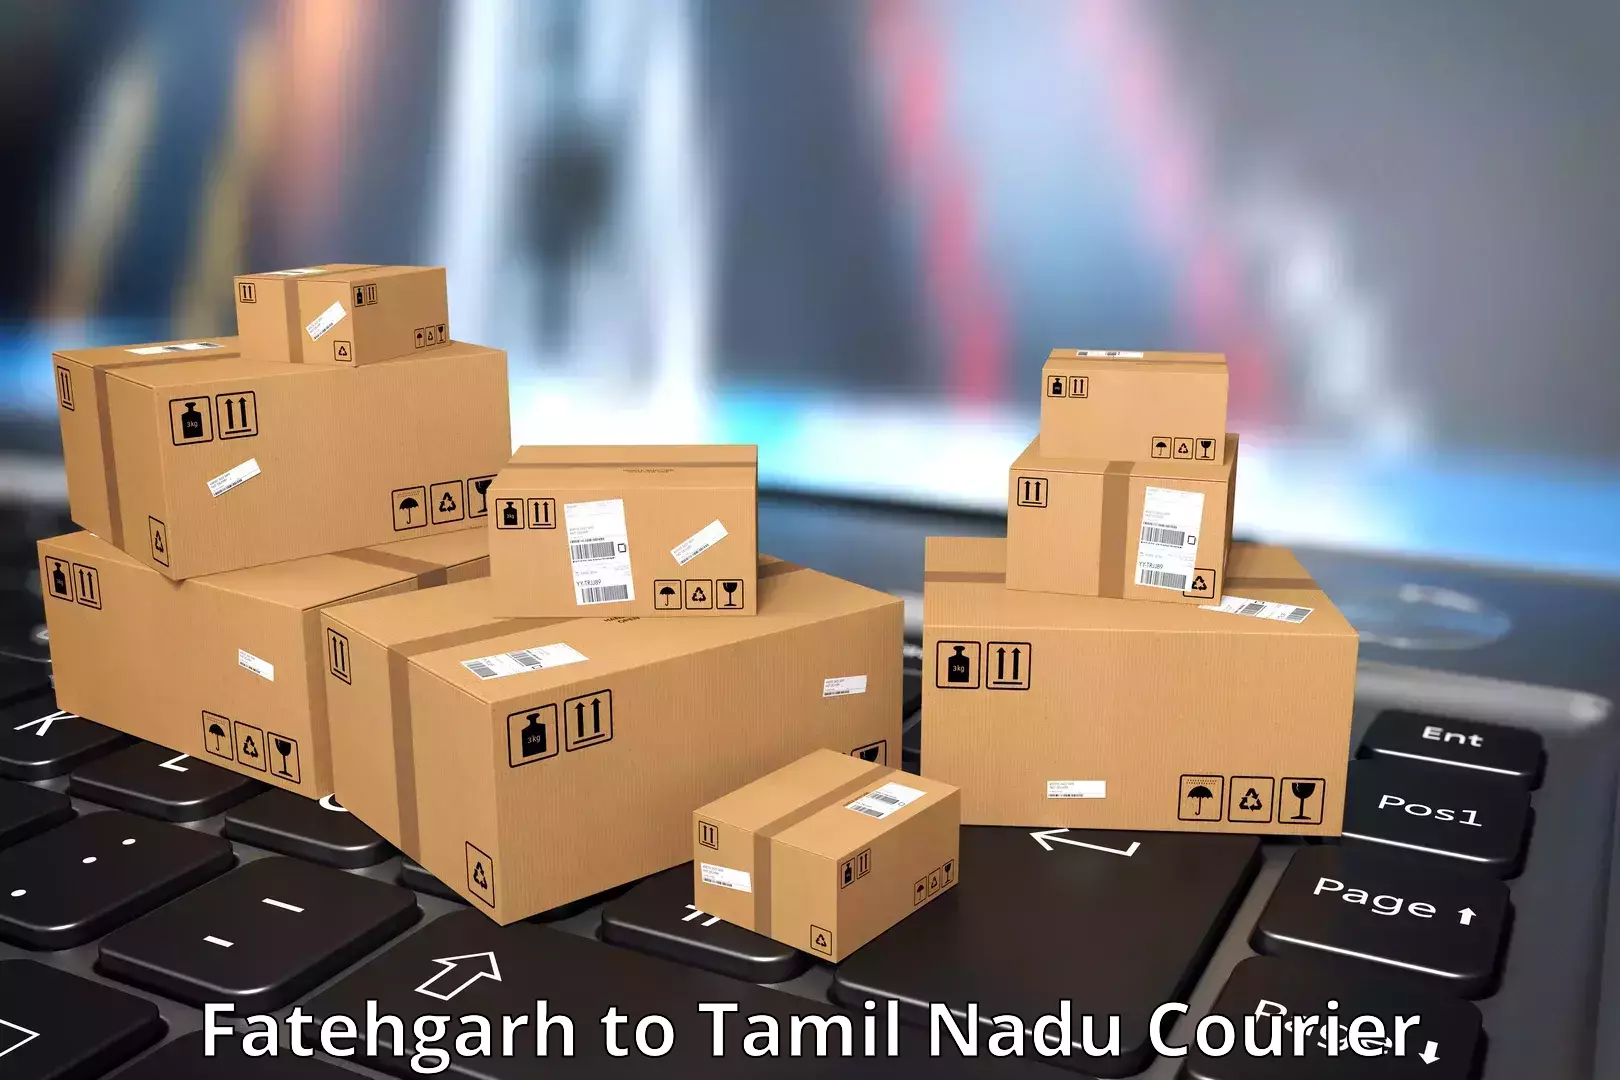 Global shipping networks Fatehgarh to Manapparai